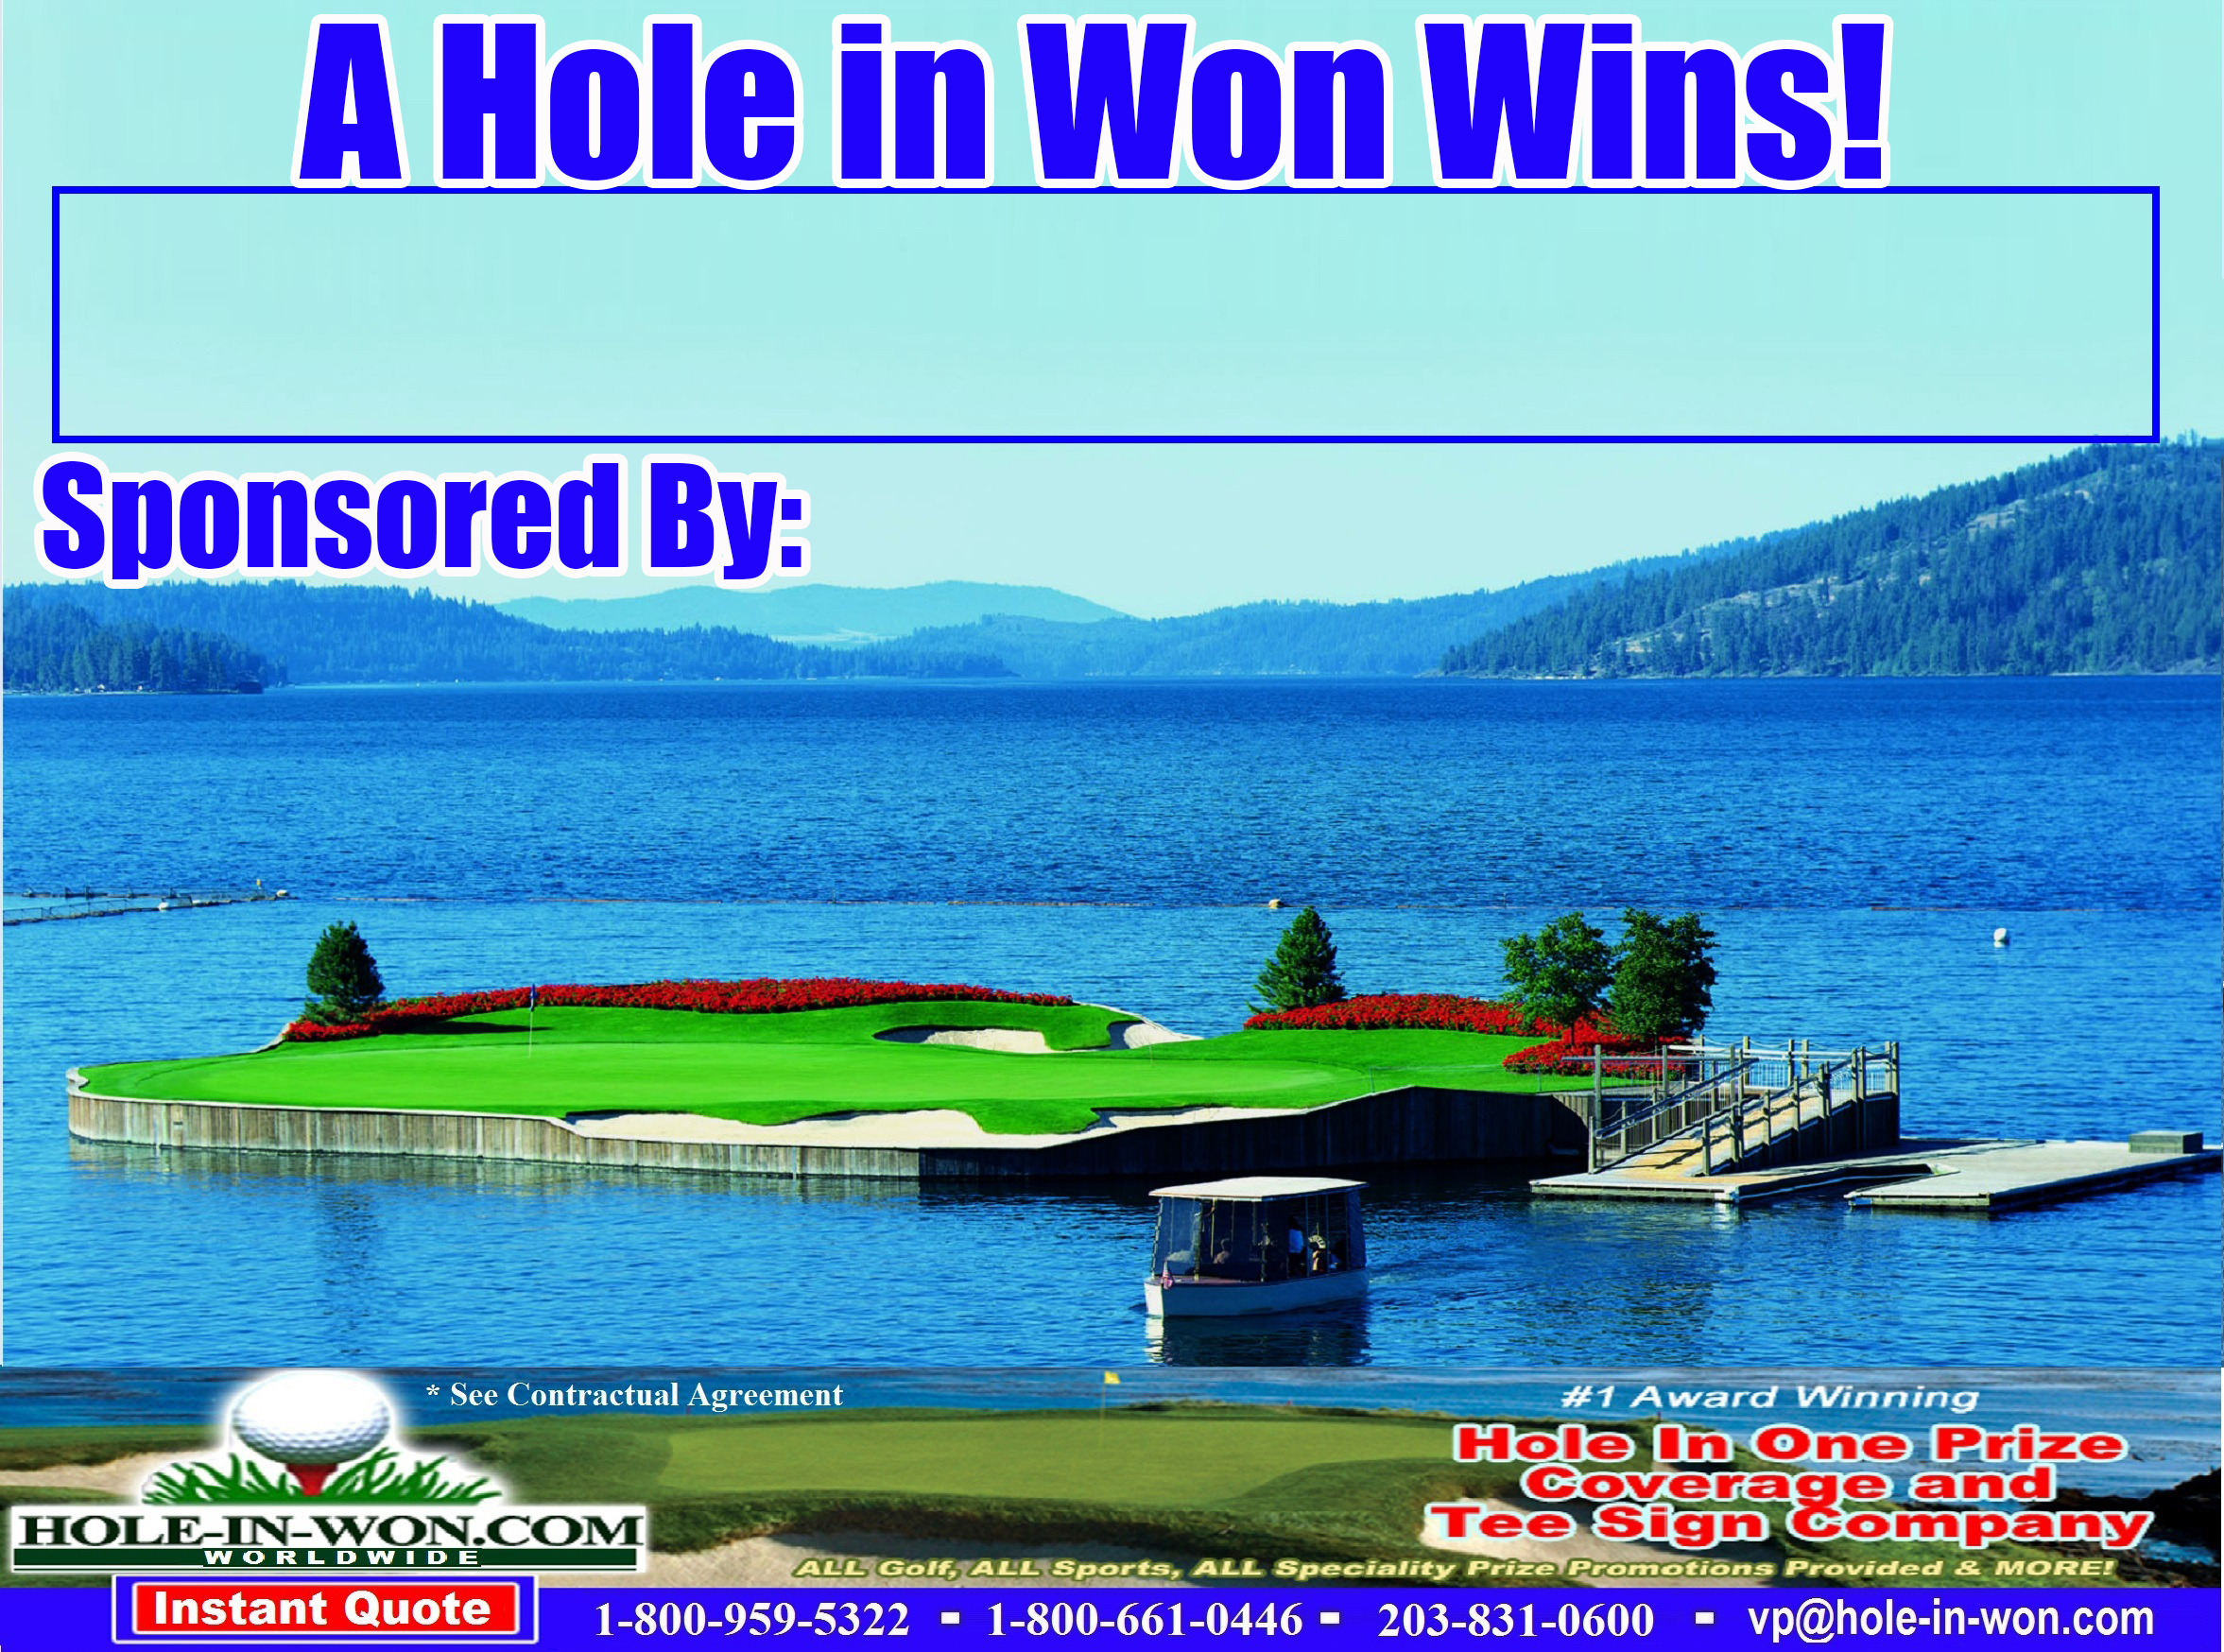 Coeur d'Alene Hole in One Golf Tee Signs